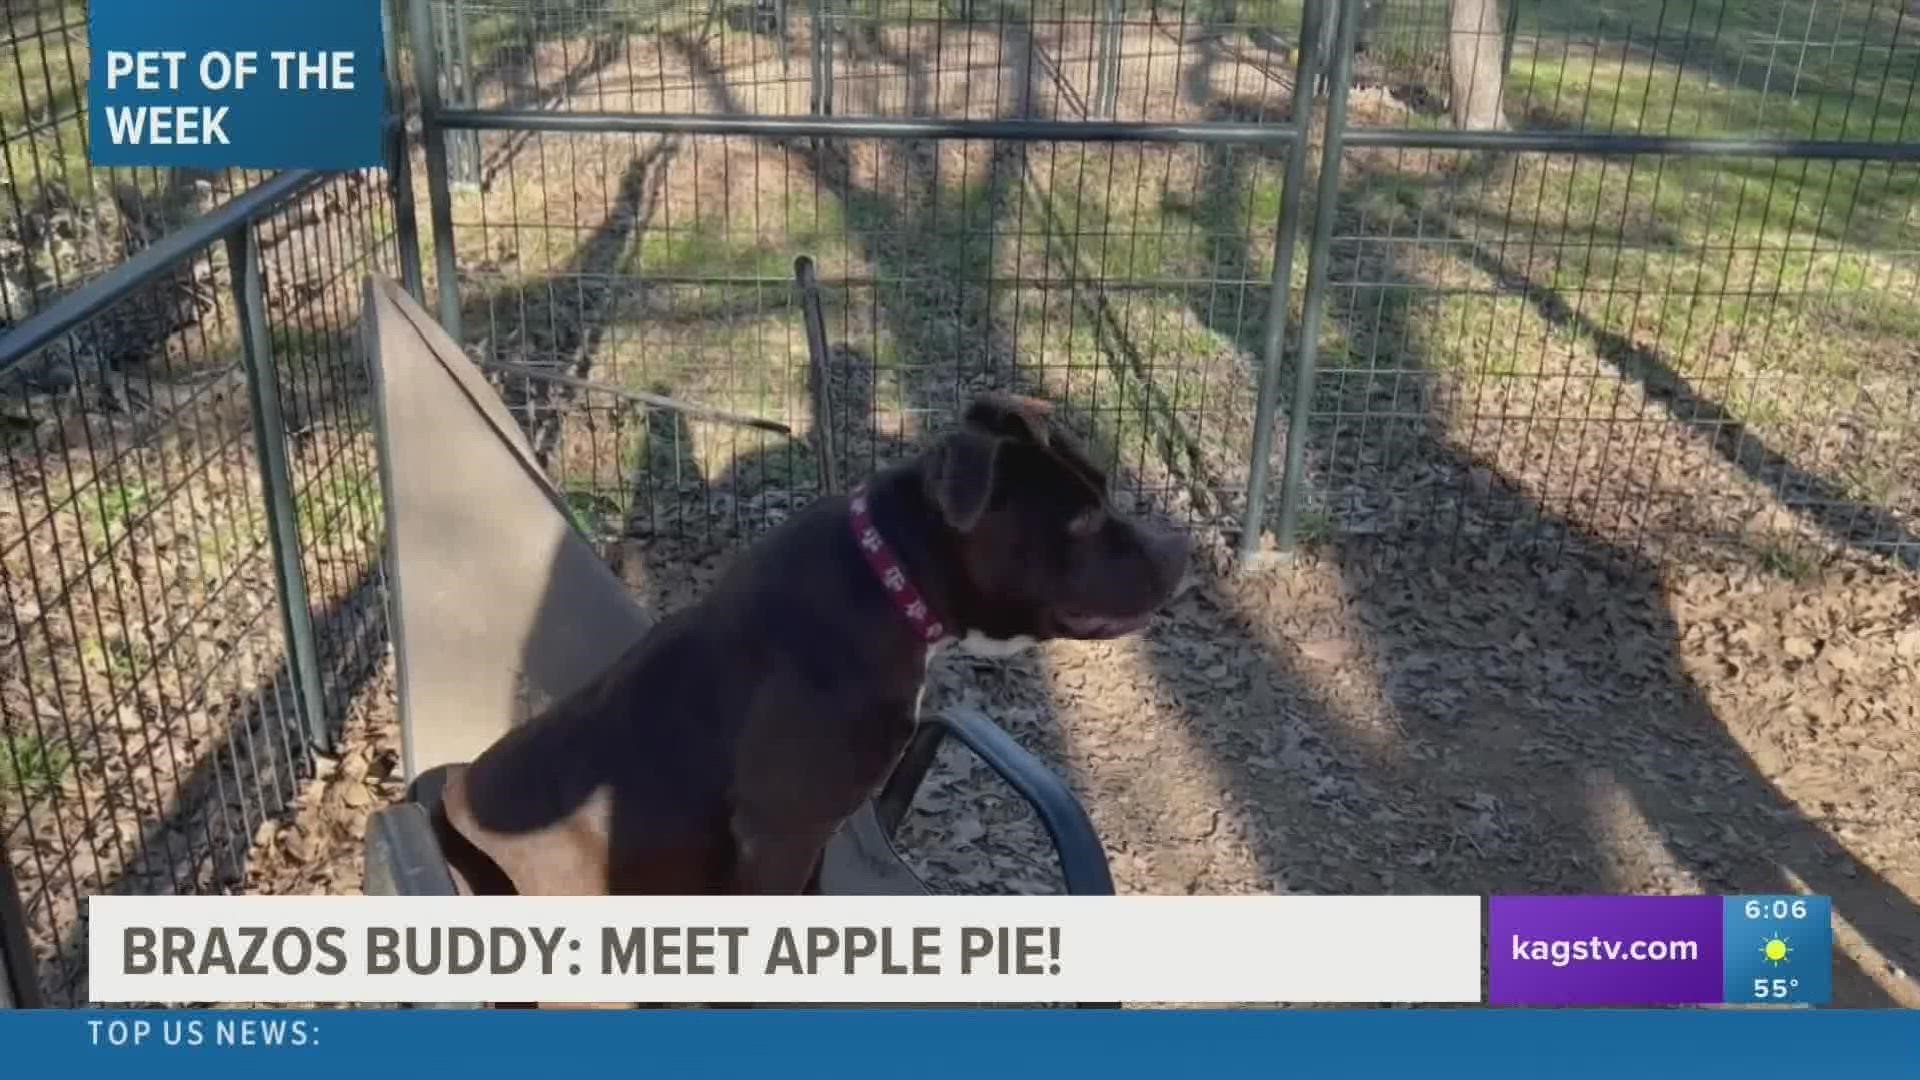 This week's featured Brazos Buddy is Apple Pie, a seven-year-old Pit Bull Terrier mix that's looking to be adopted.